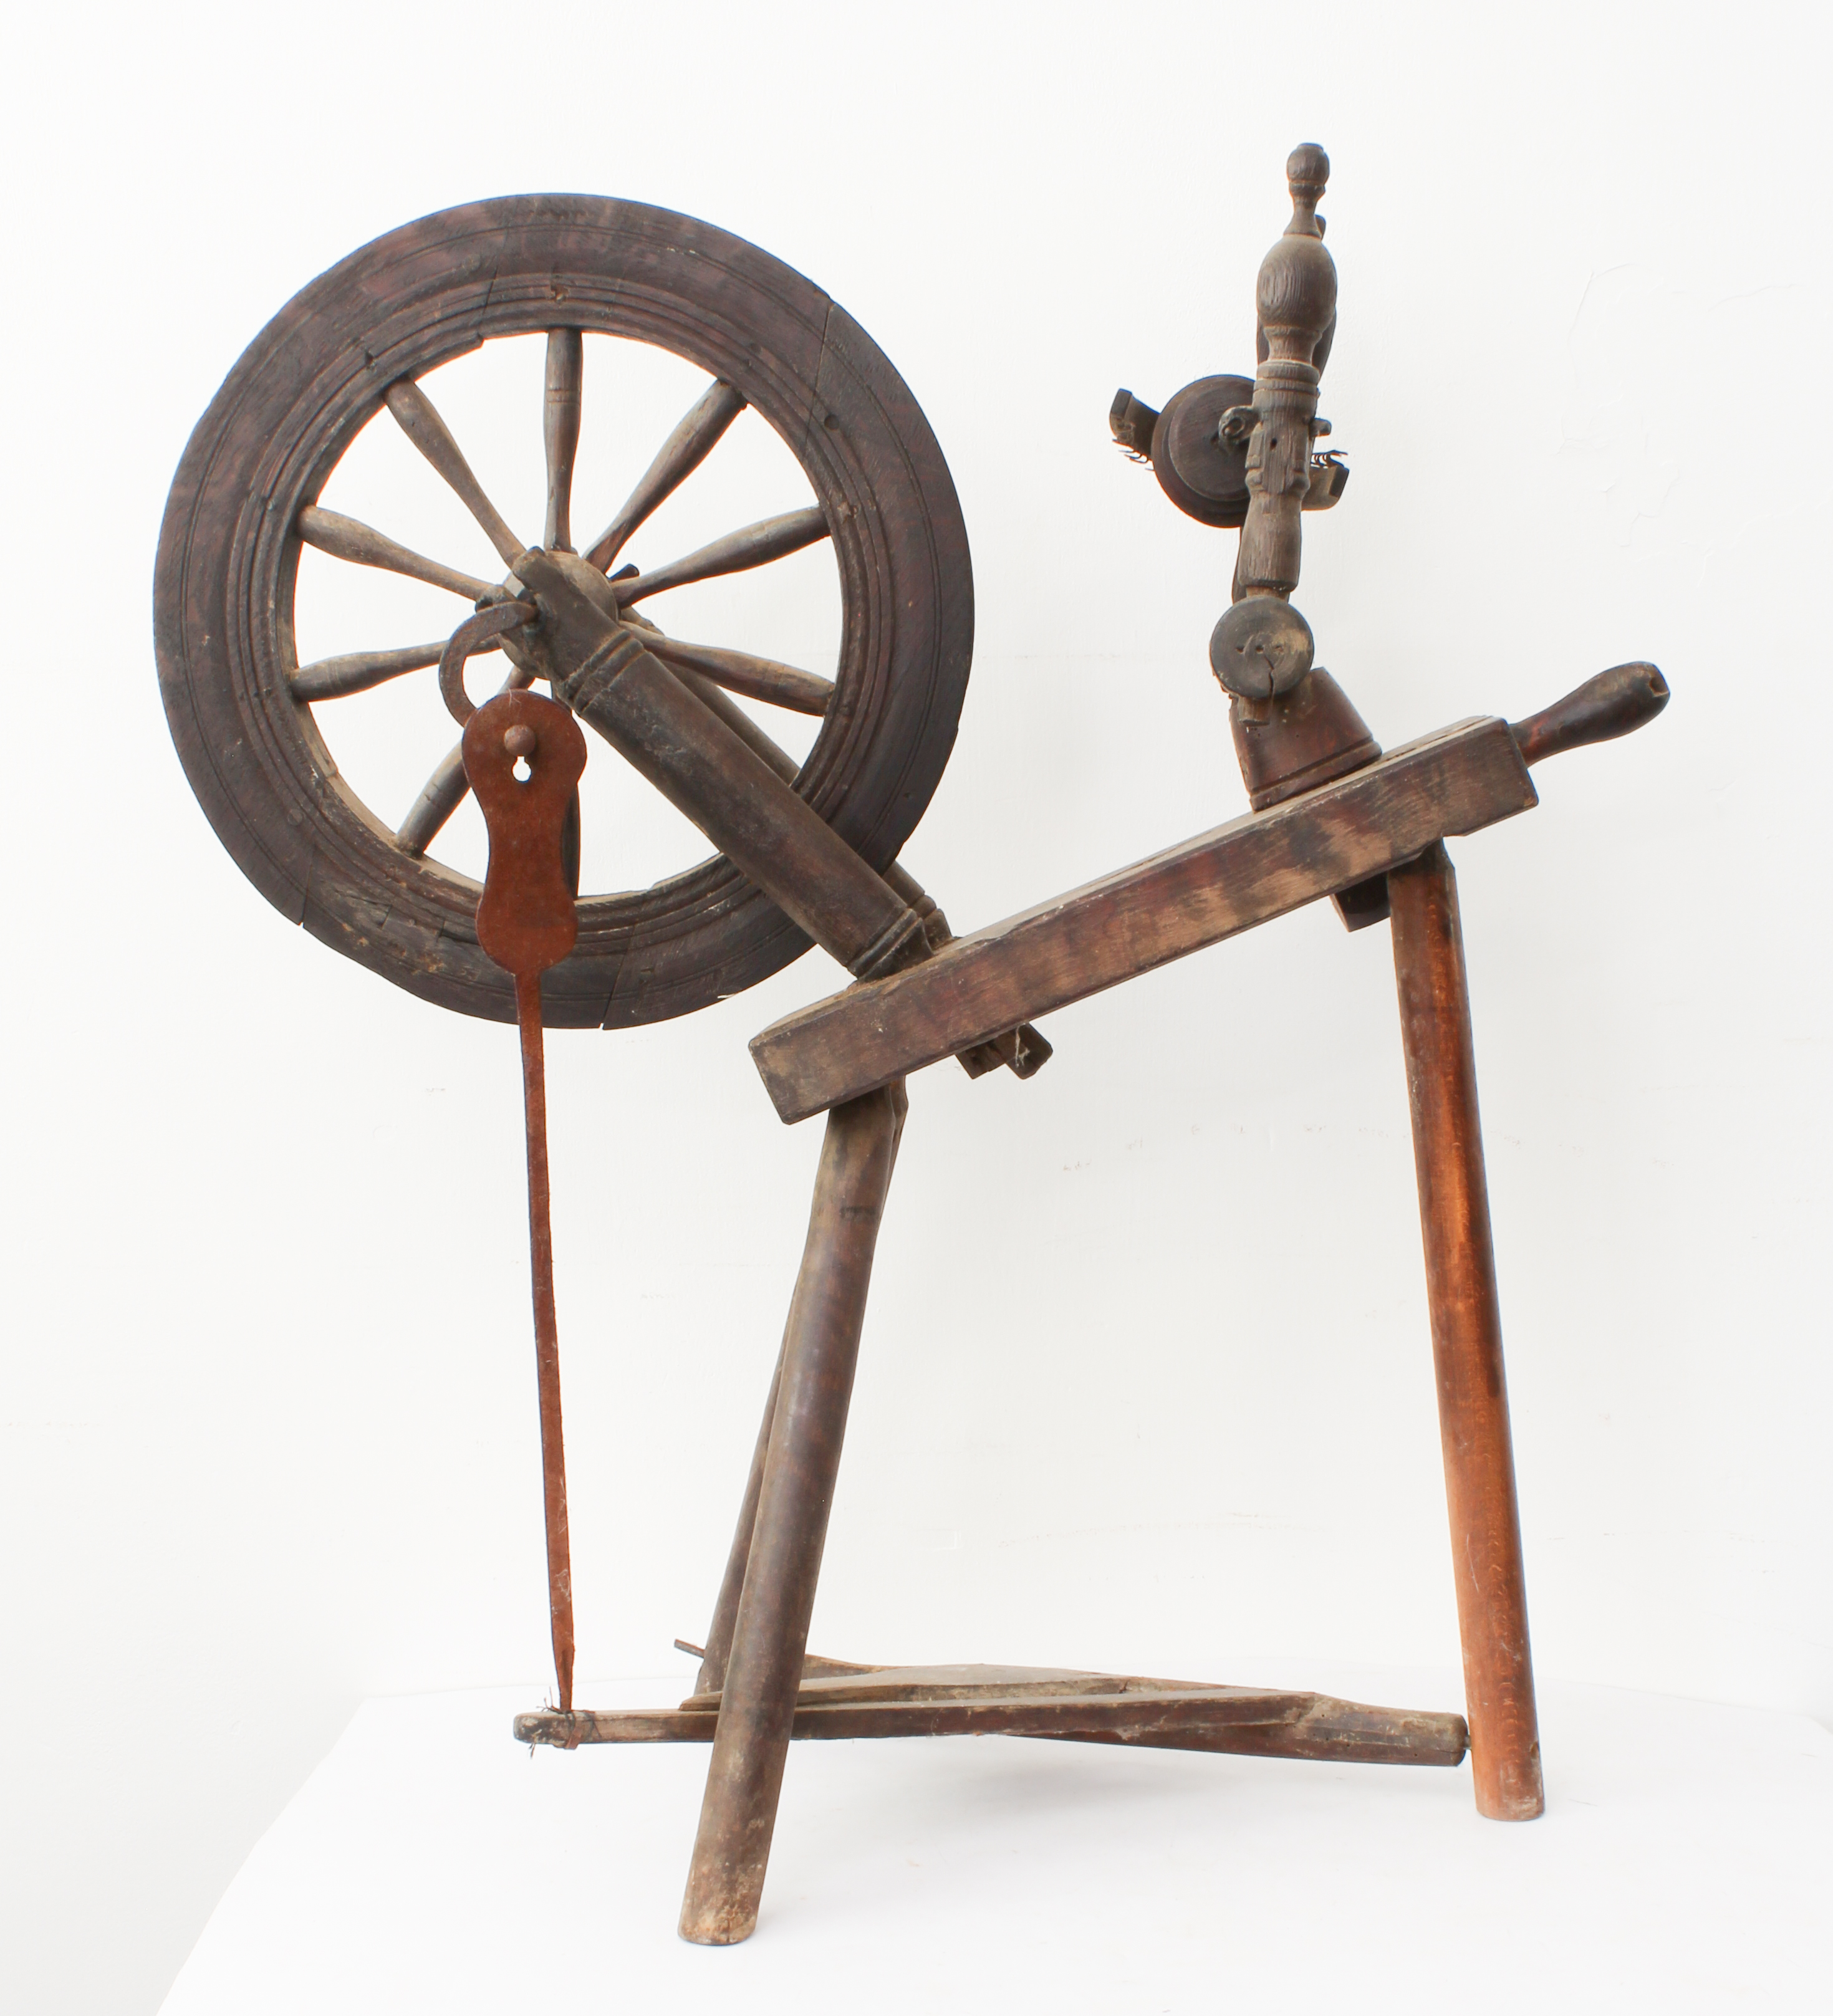 Two antique spinning wheels - some missing parts. - Image 4 of 5